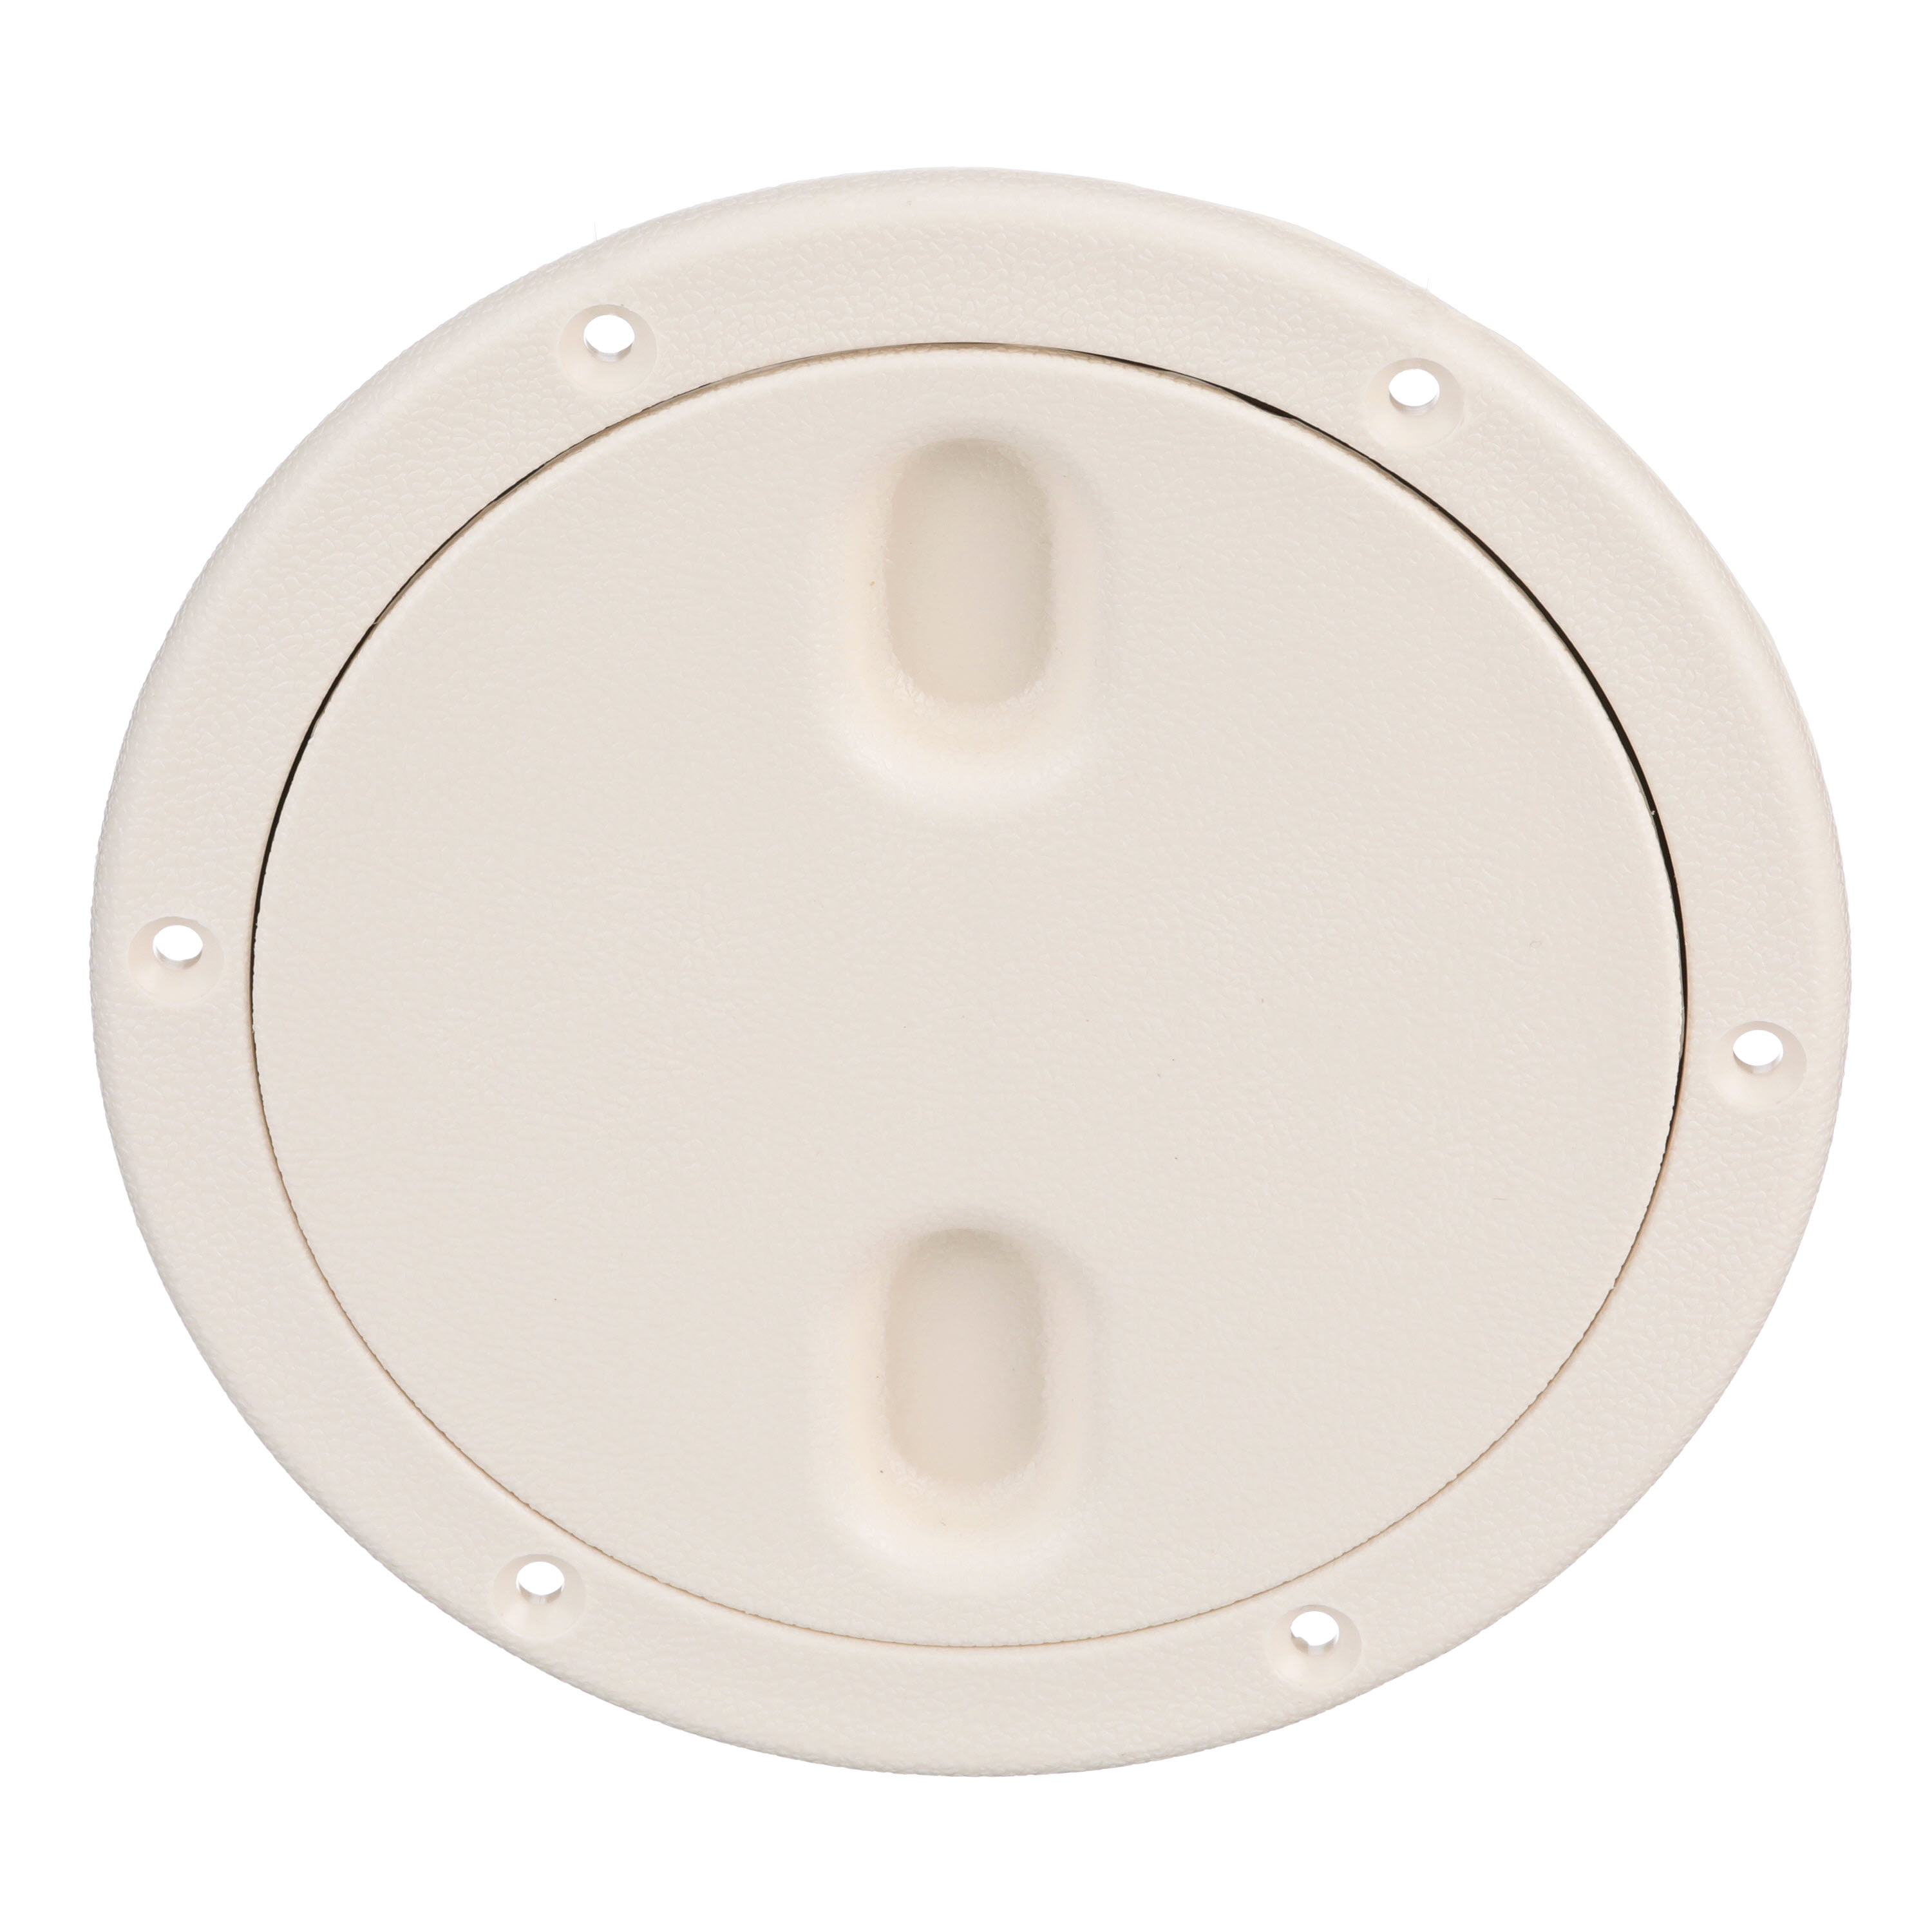 Arctic White Finish SEACHOICE 39601 Mounted Boat Plate Cover up to 4 Inches 